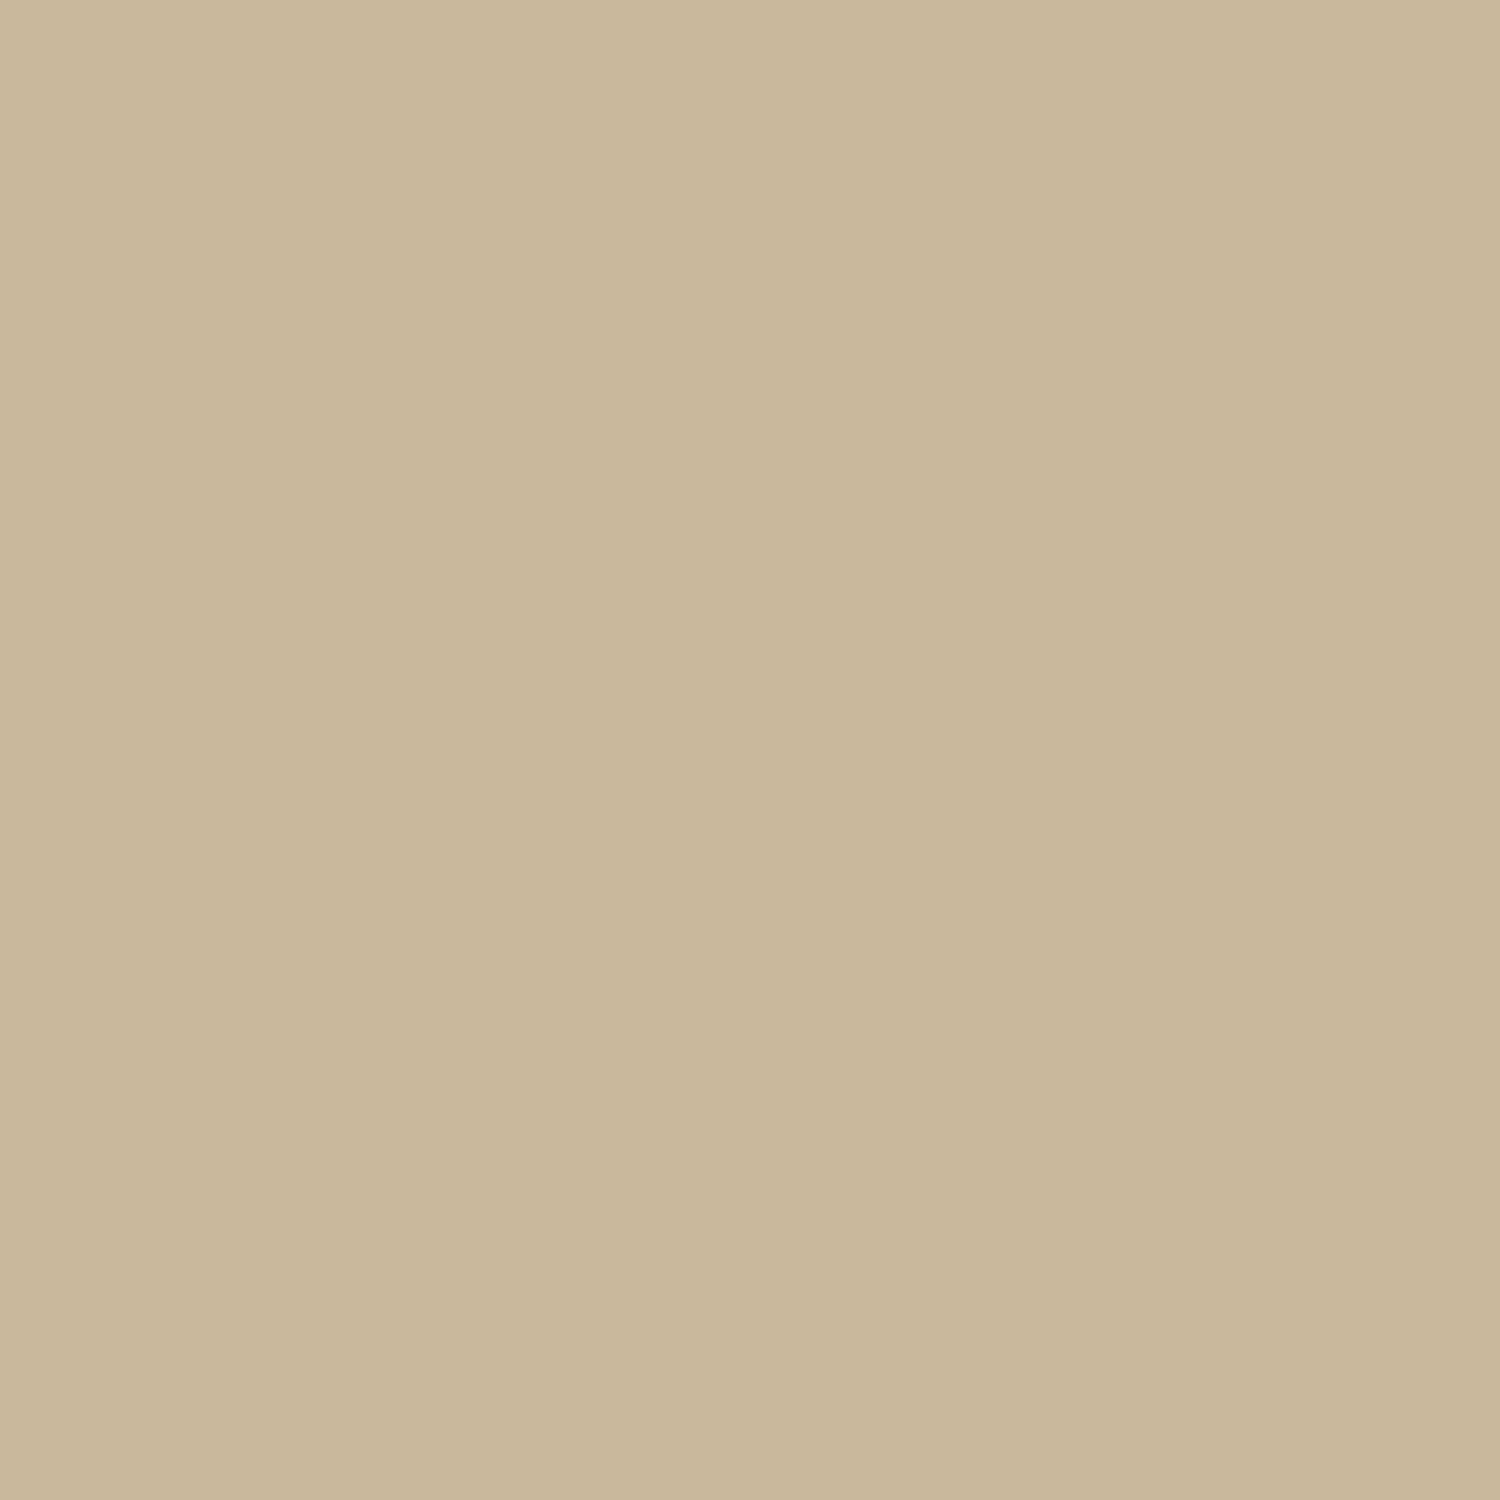 Springs Creative Natural Charm Solid Color Khaki 100% Cotton Fabric by The Yard - image 1 of 1